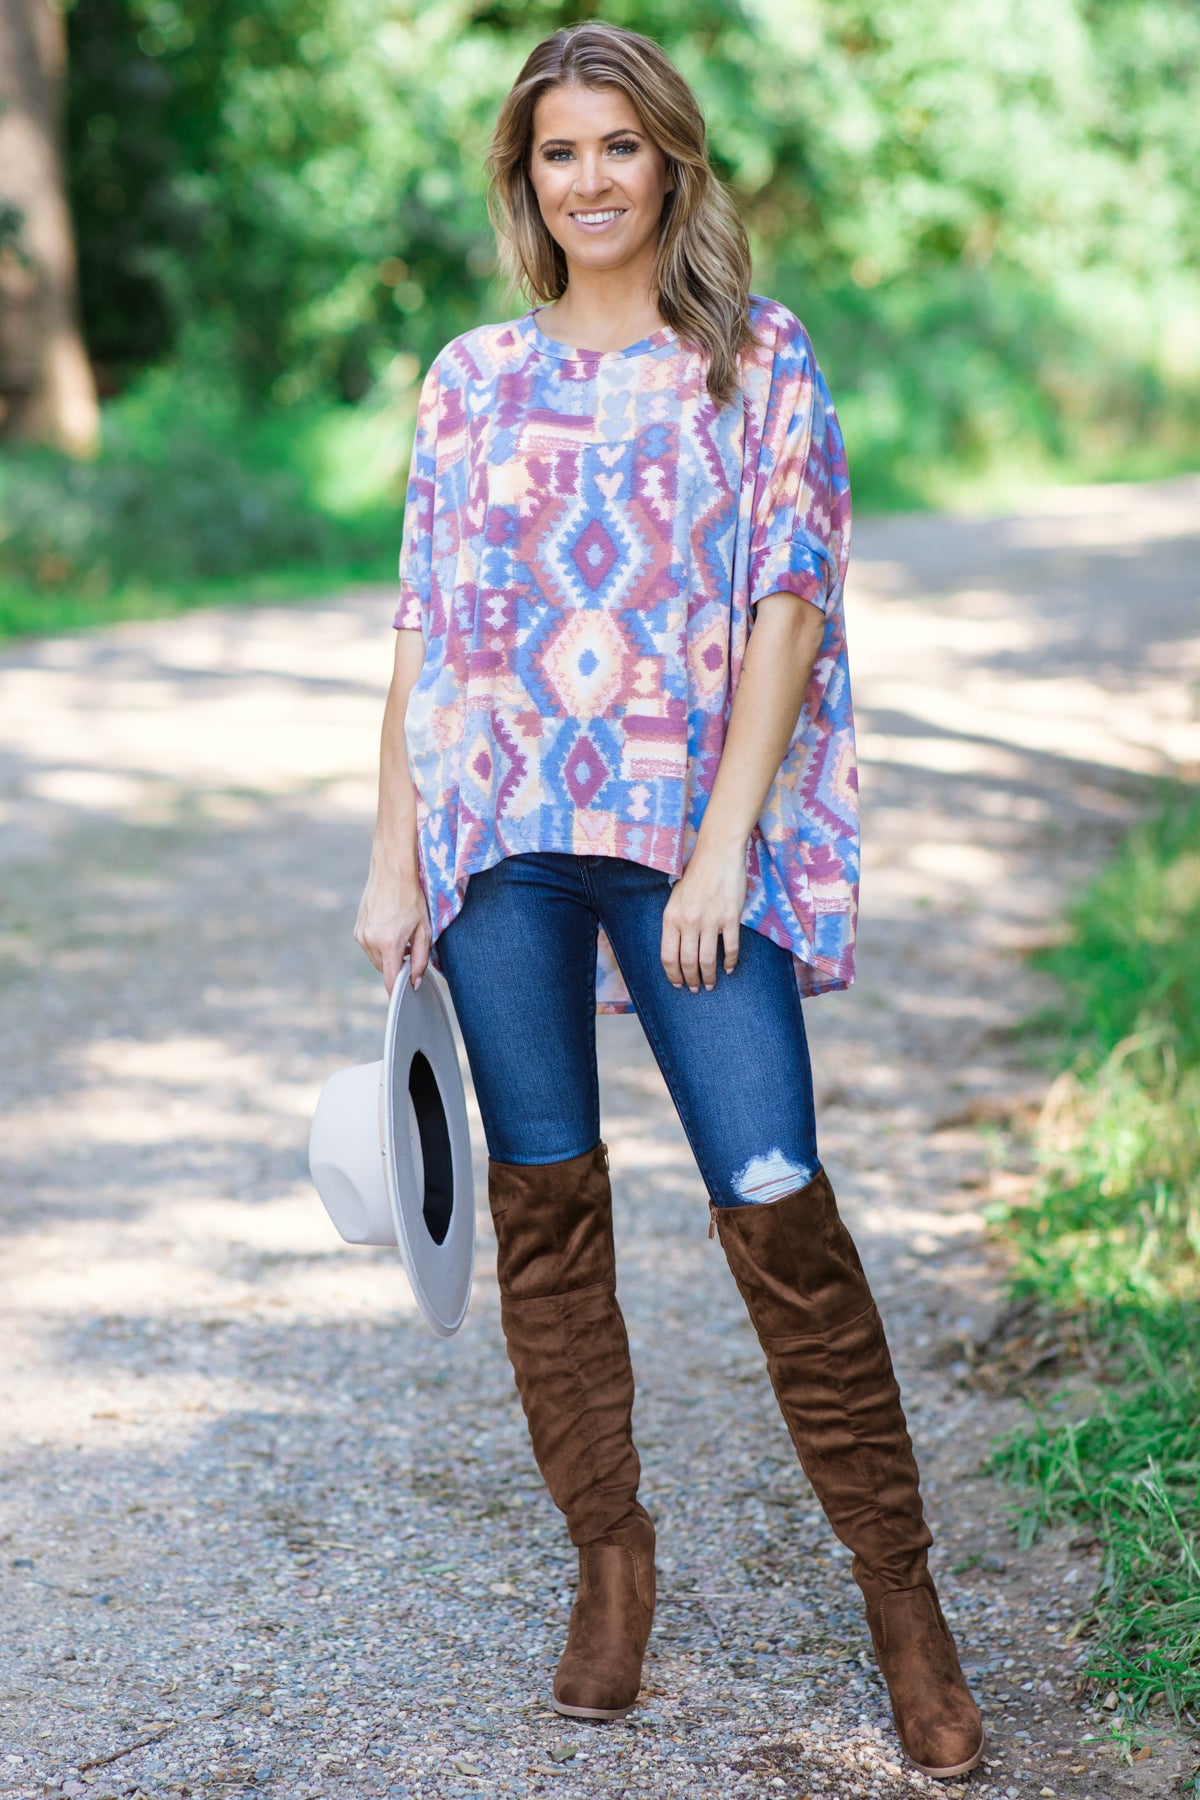 Dusty Rose and Peach Aztec Print Top - Filly Flair